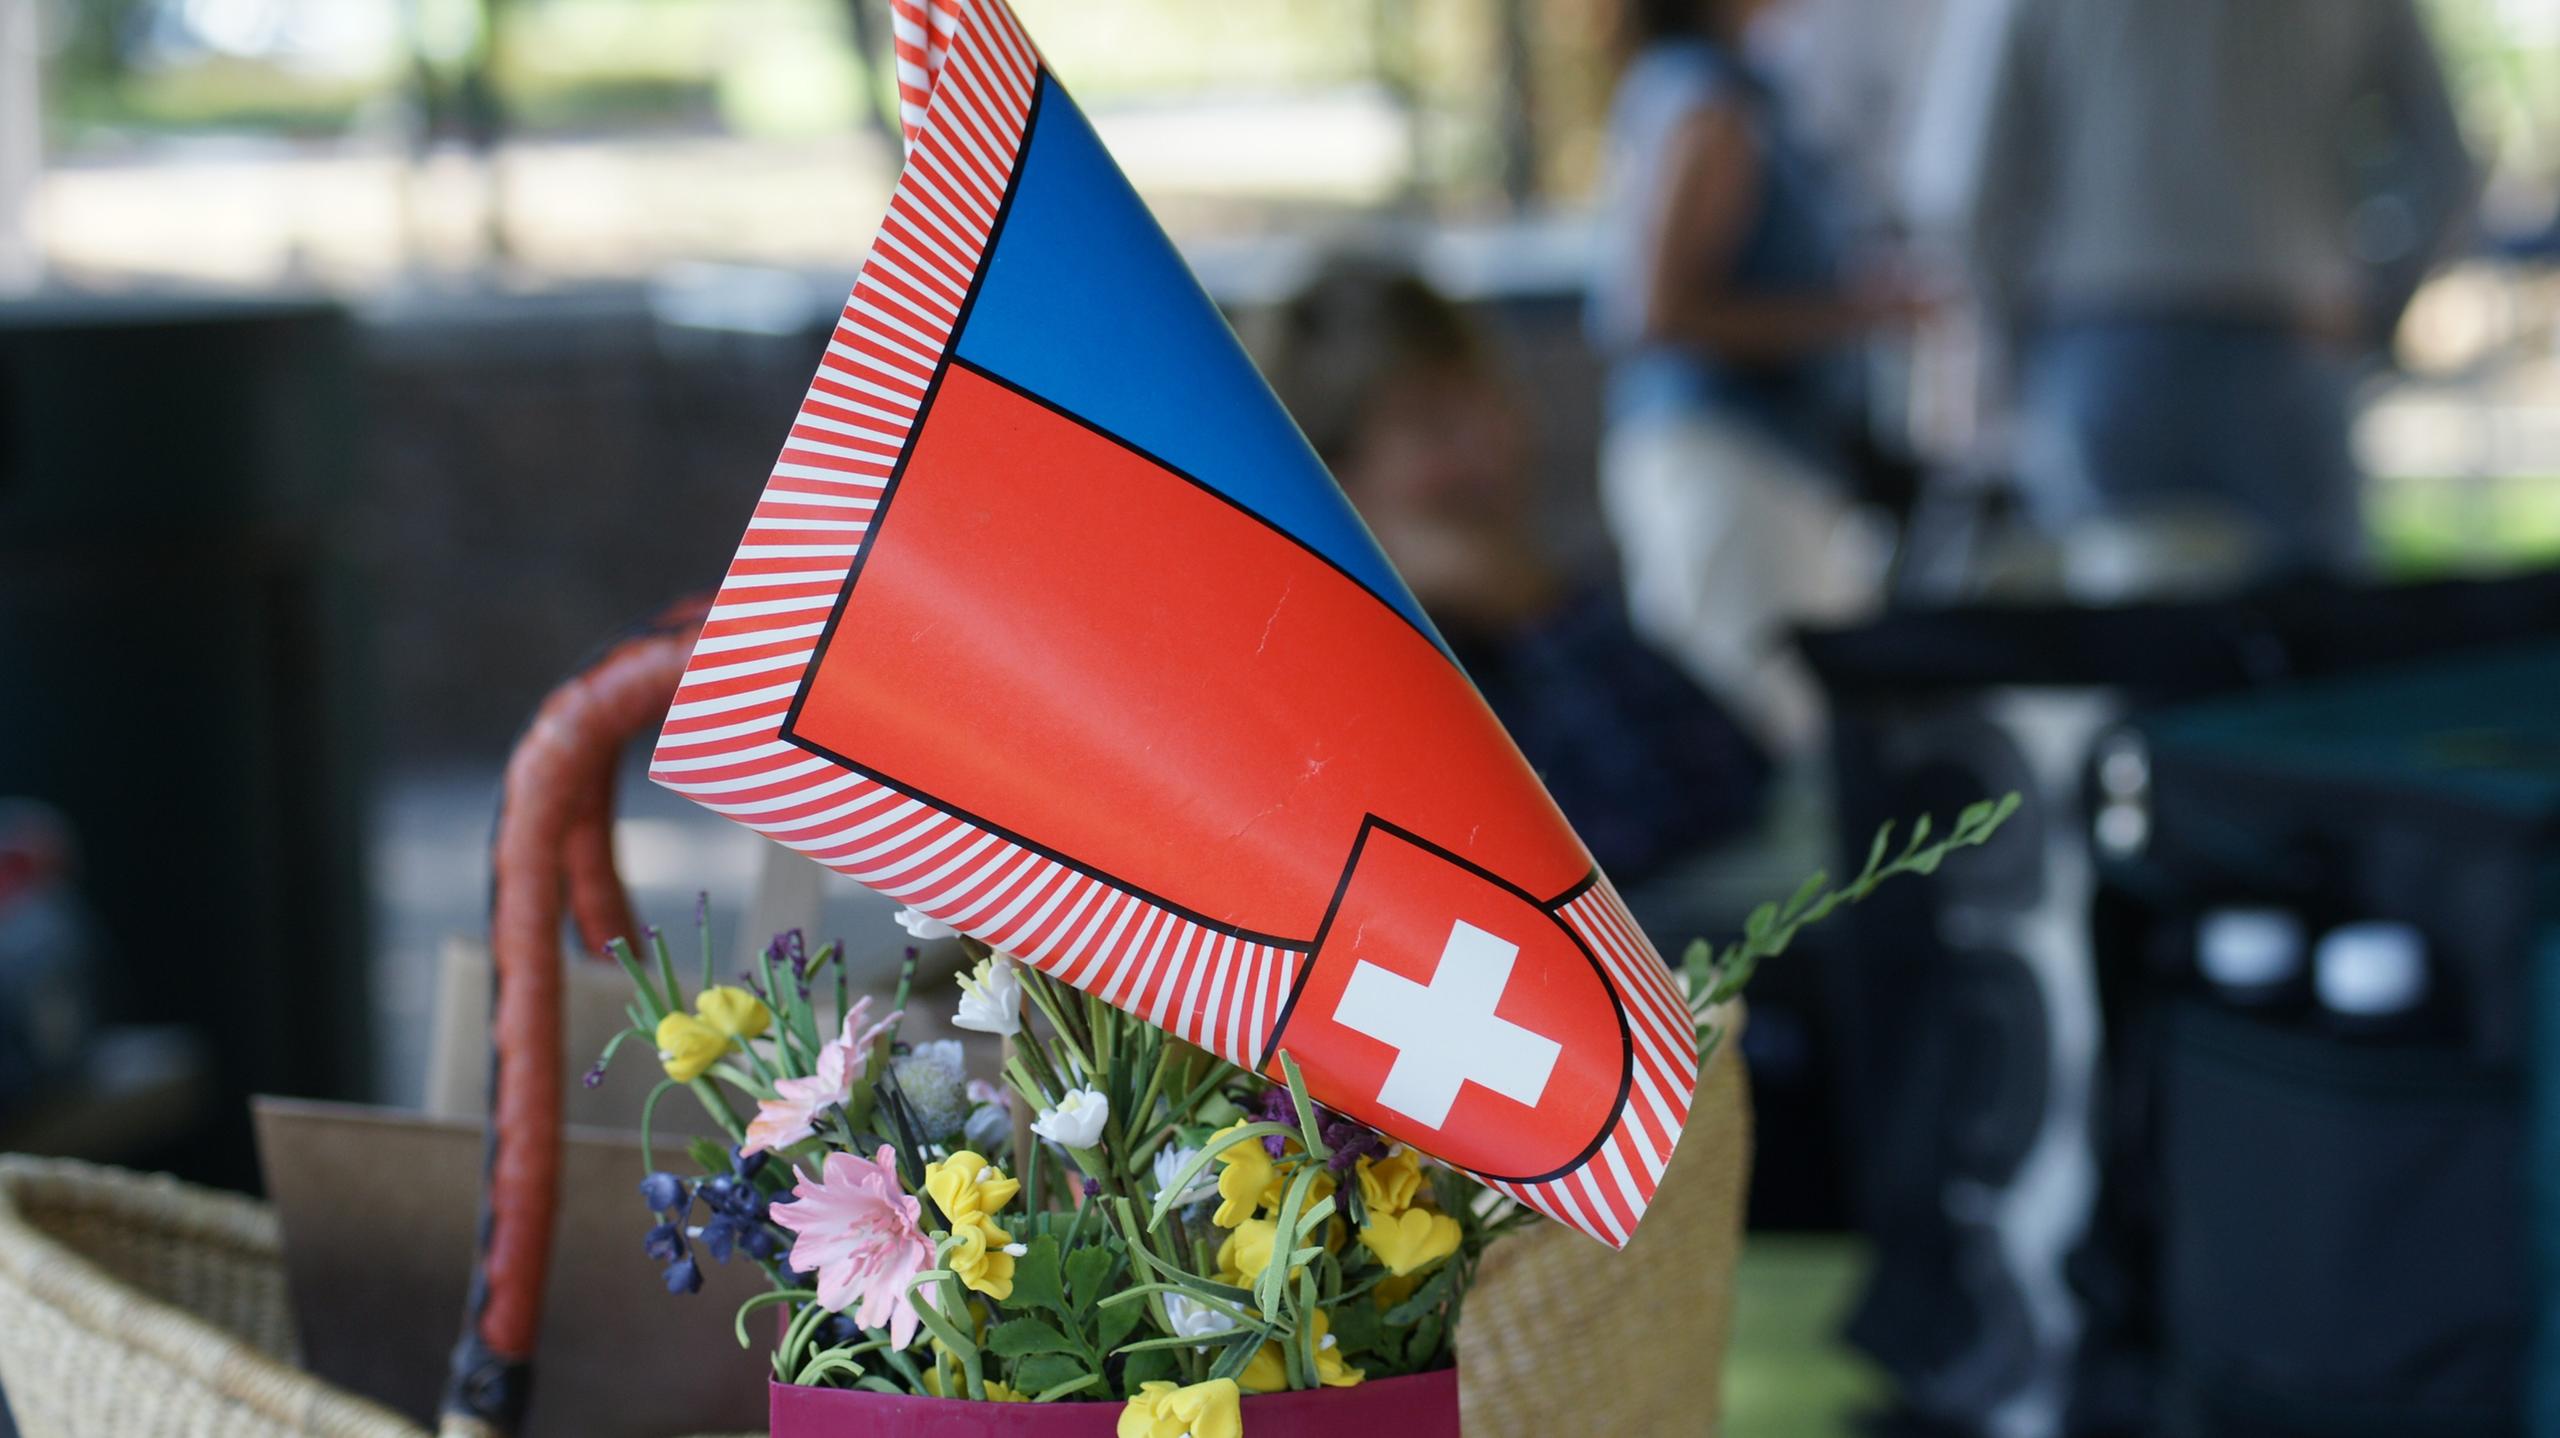 Small Ticino flag planted in a flower pot